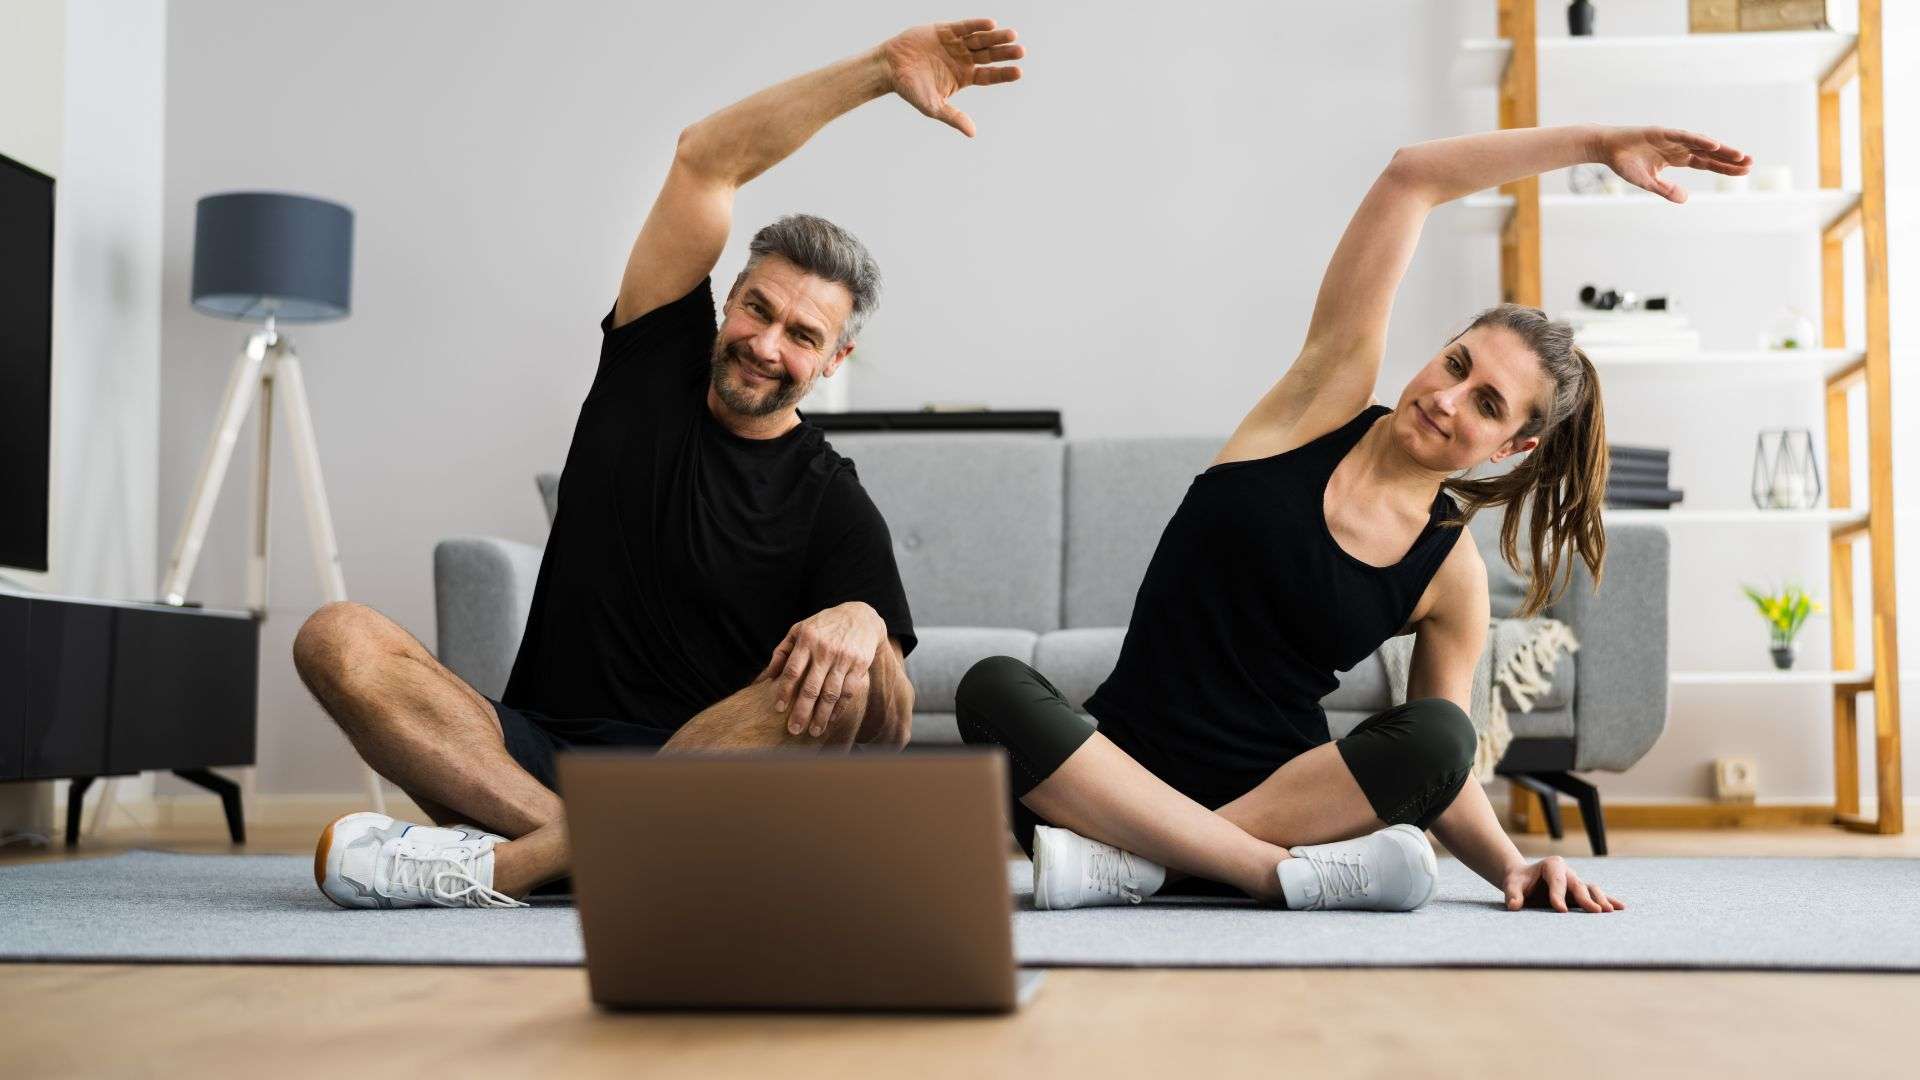 A middle aged couple working out at home to a video on a laptop.